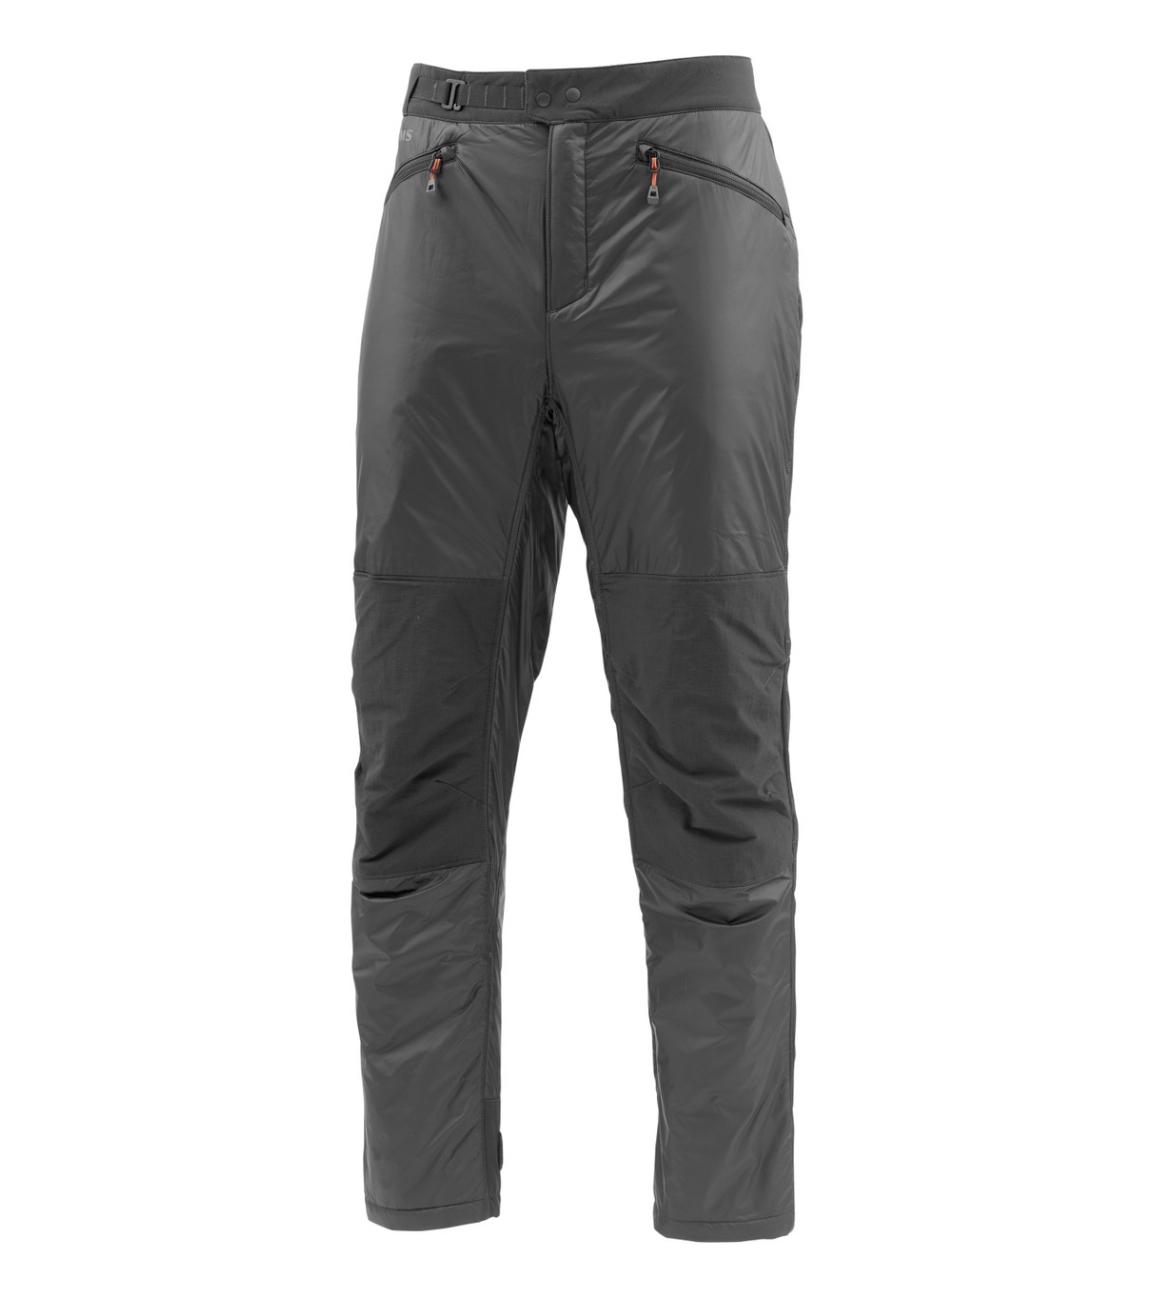 Simms M's MidStream Insulated Pant - XL